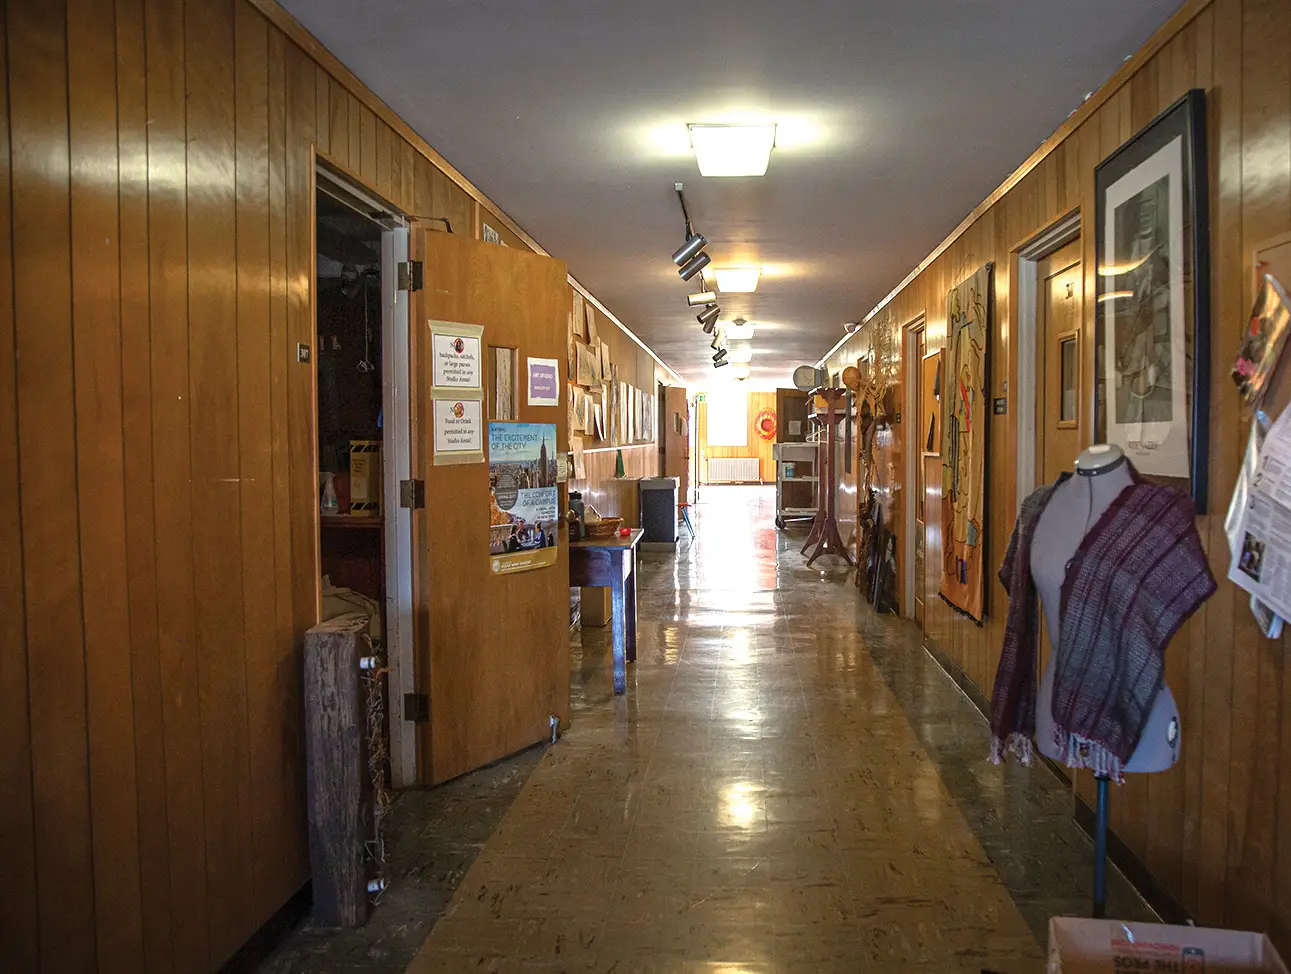 Long hallway with wood paneling walls and pictures